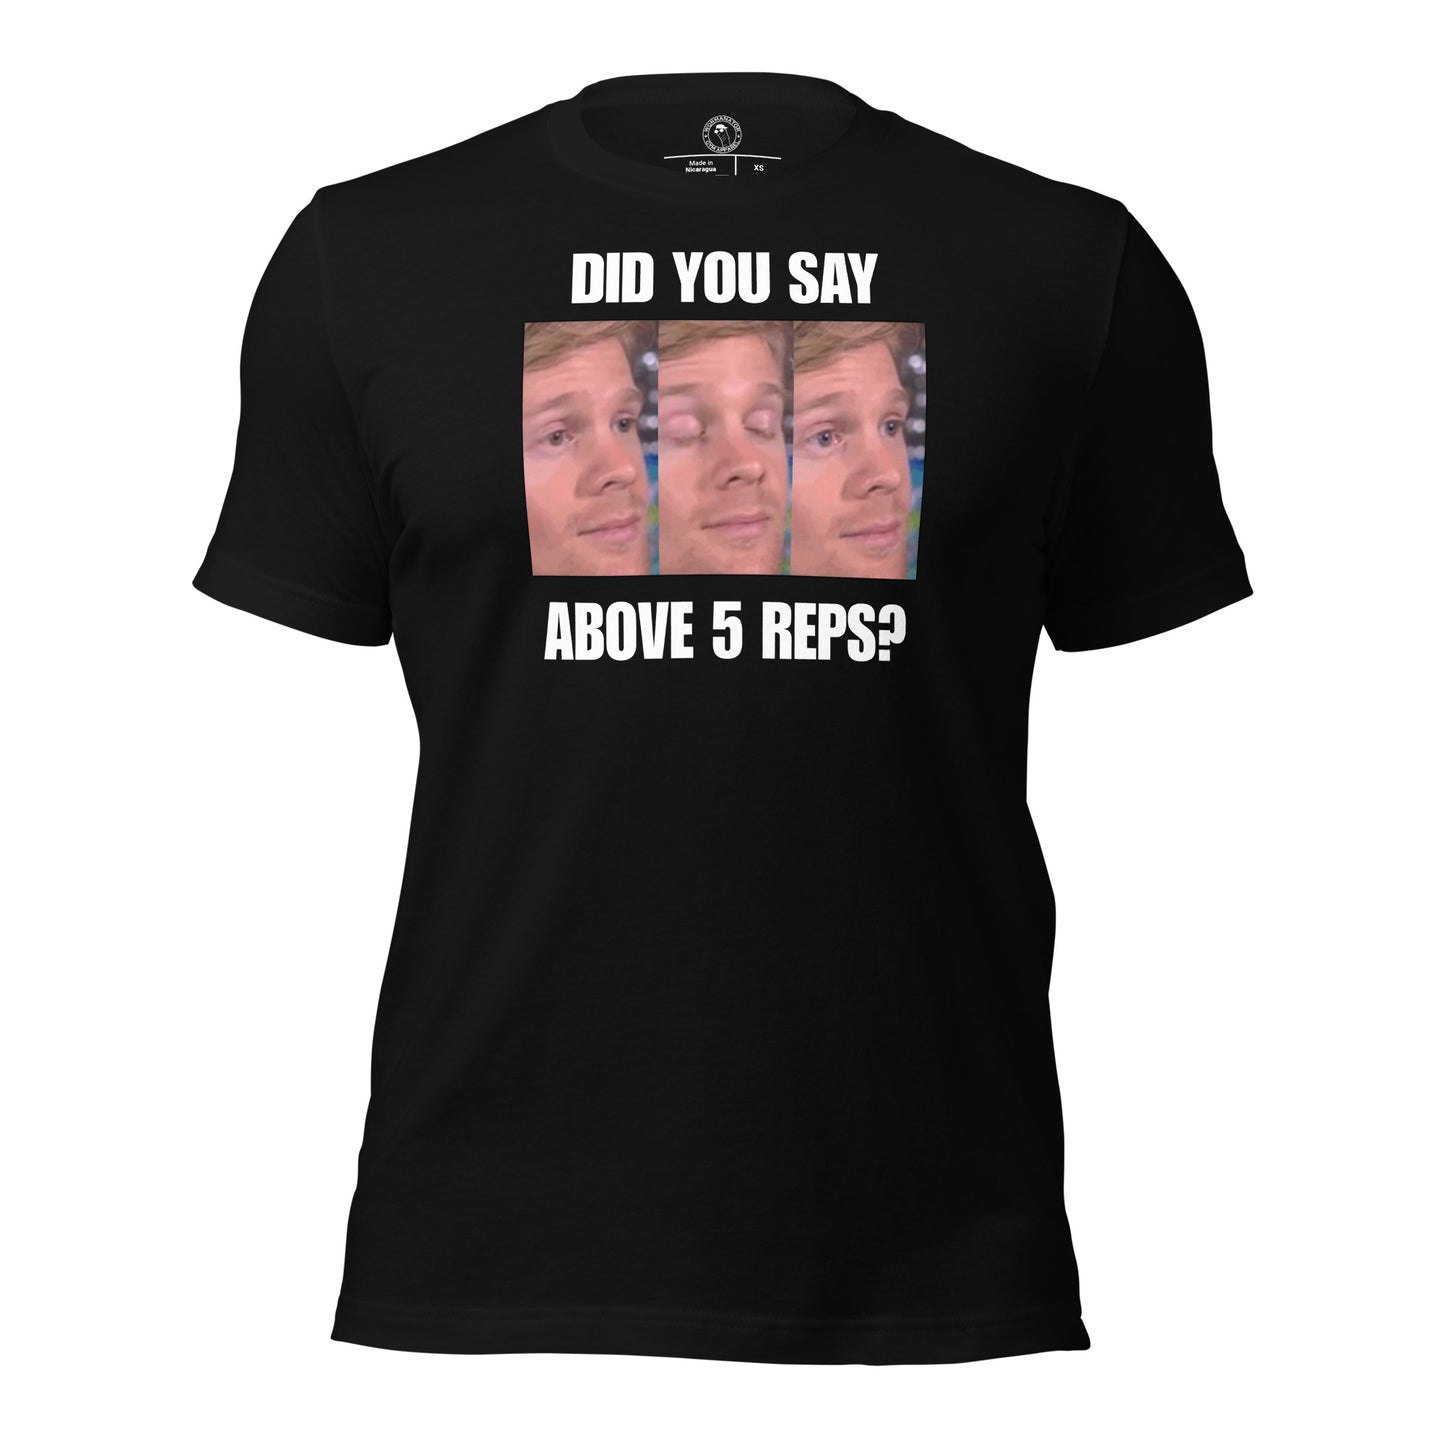 Above 5 Reps is Cardio Shirt in Black